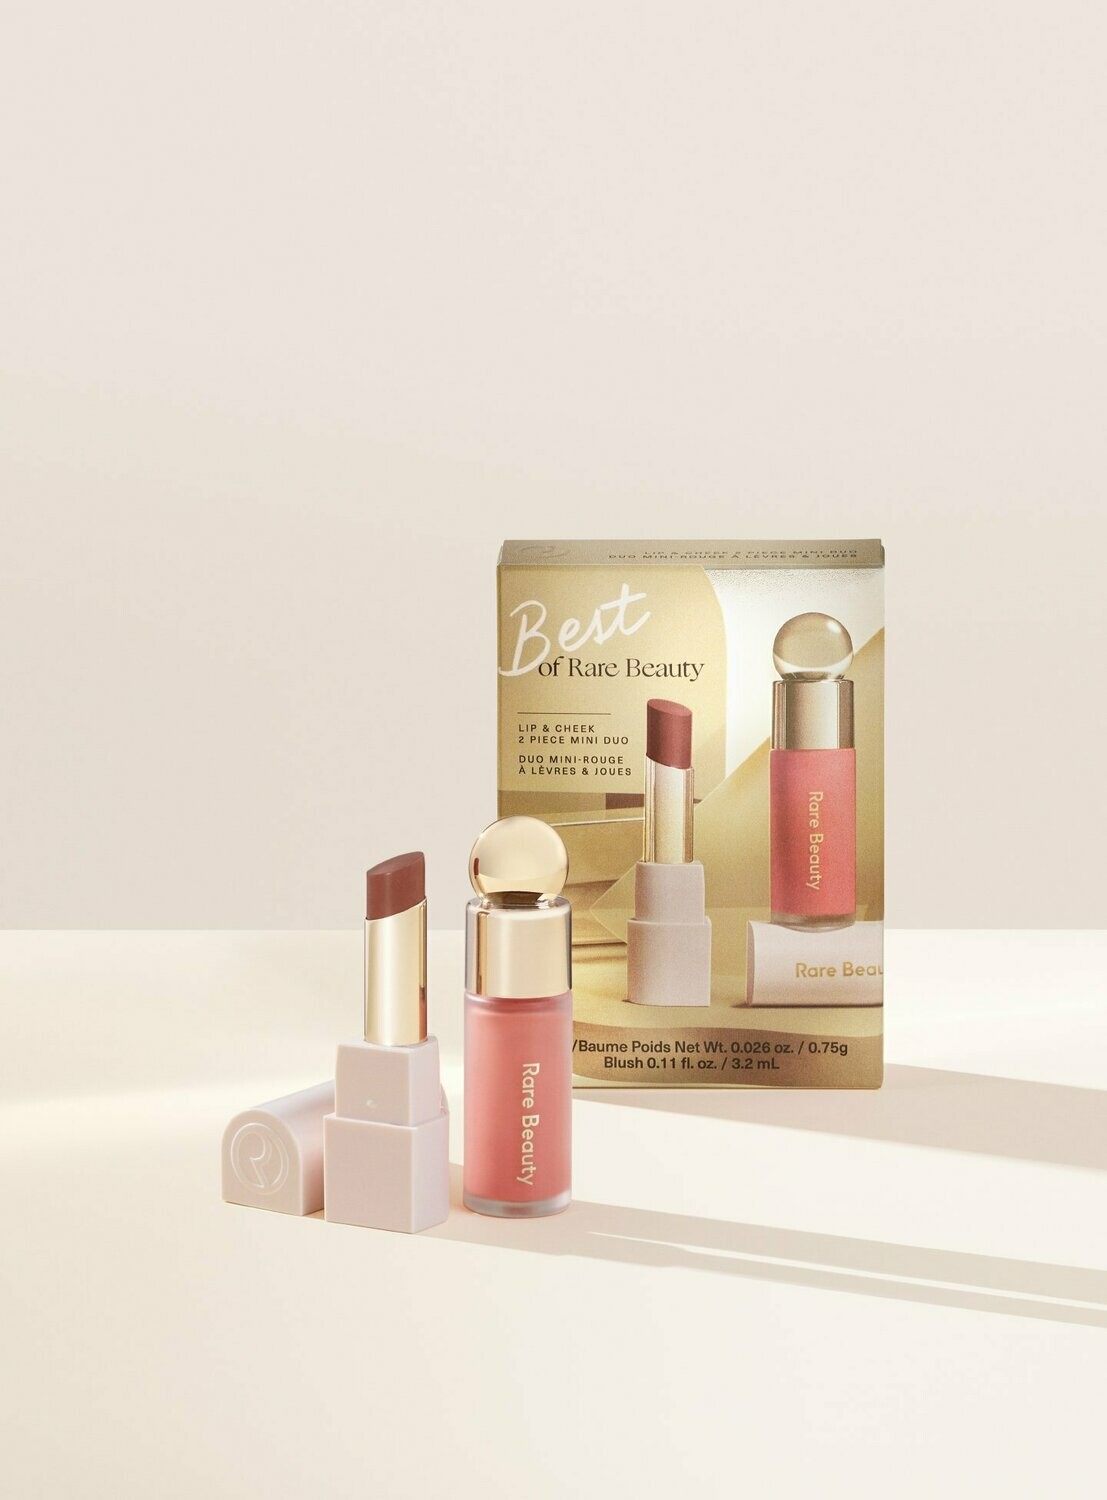 Limited Edition Best of Rare Beauty Sets